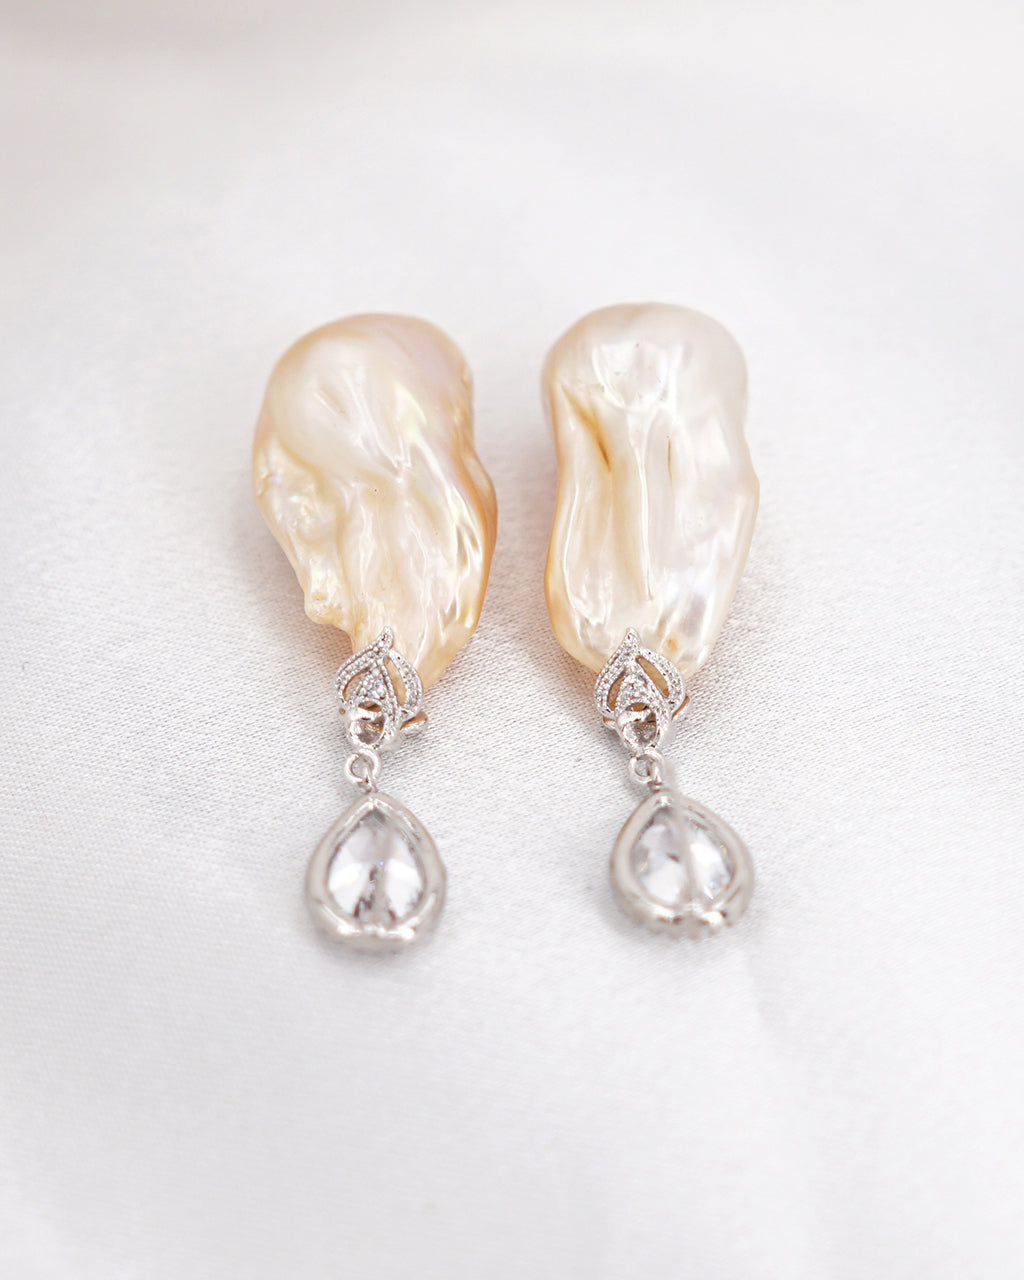 Fresh Water Baroque Pearl Gold Earrings, Flame Ball Pearl Earrings for Wedding, White Pearl Gold Earrings, Anniversary Gifts, Se156